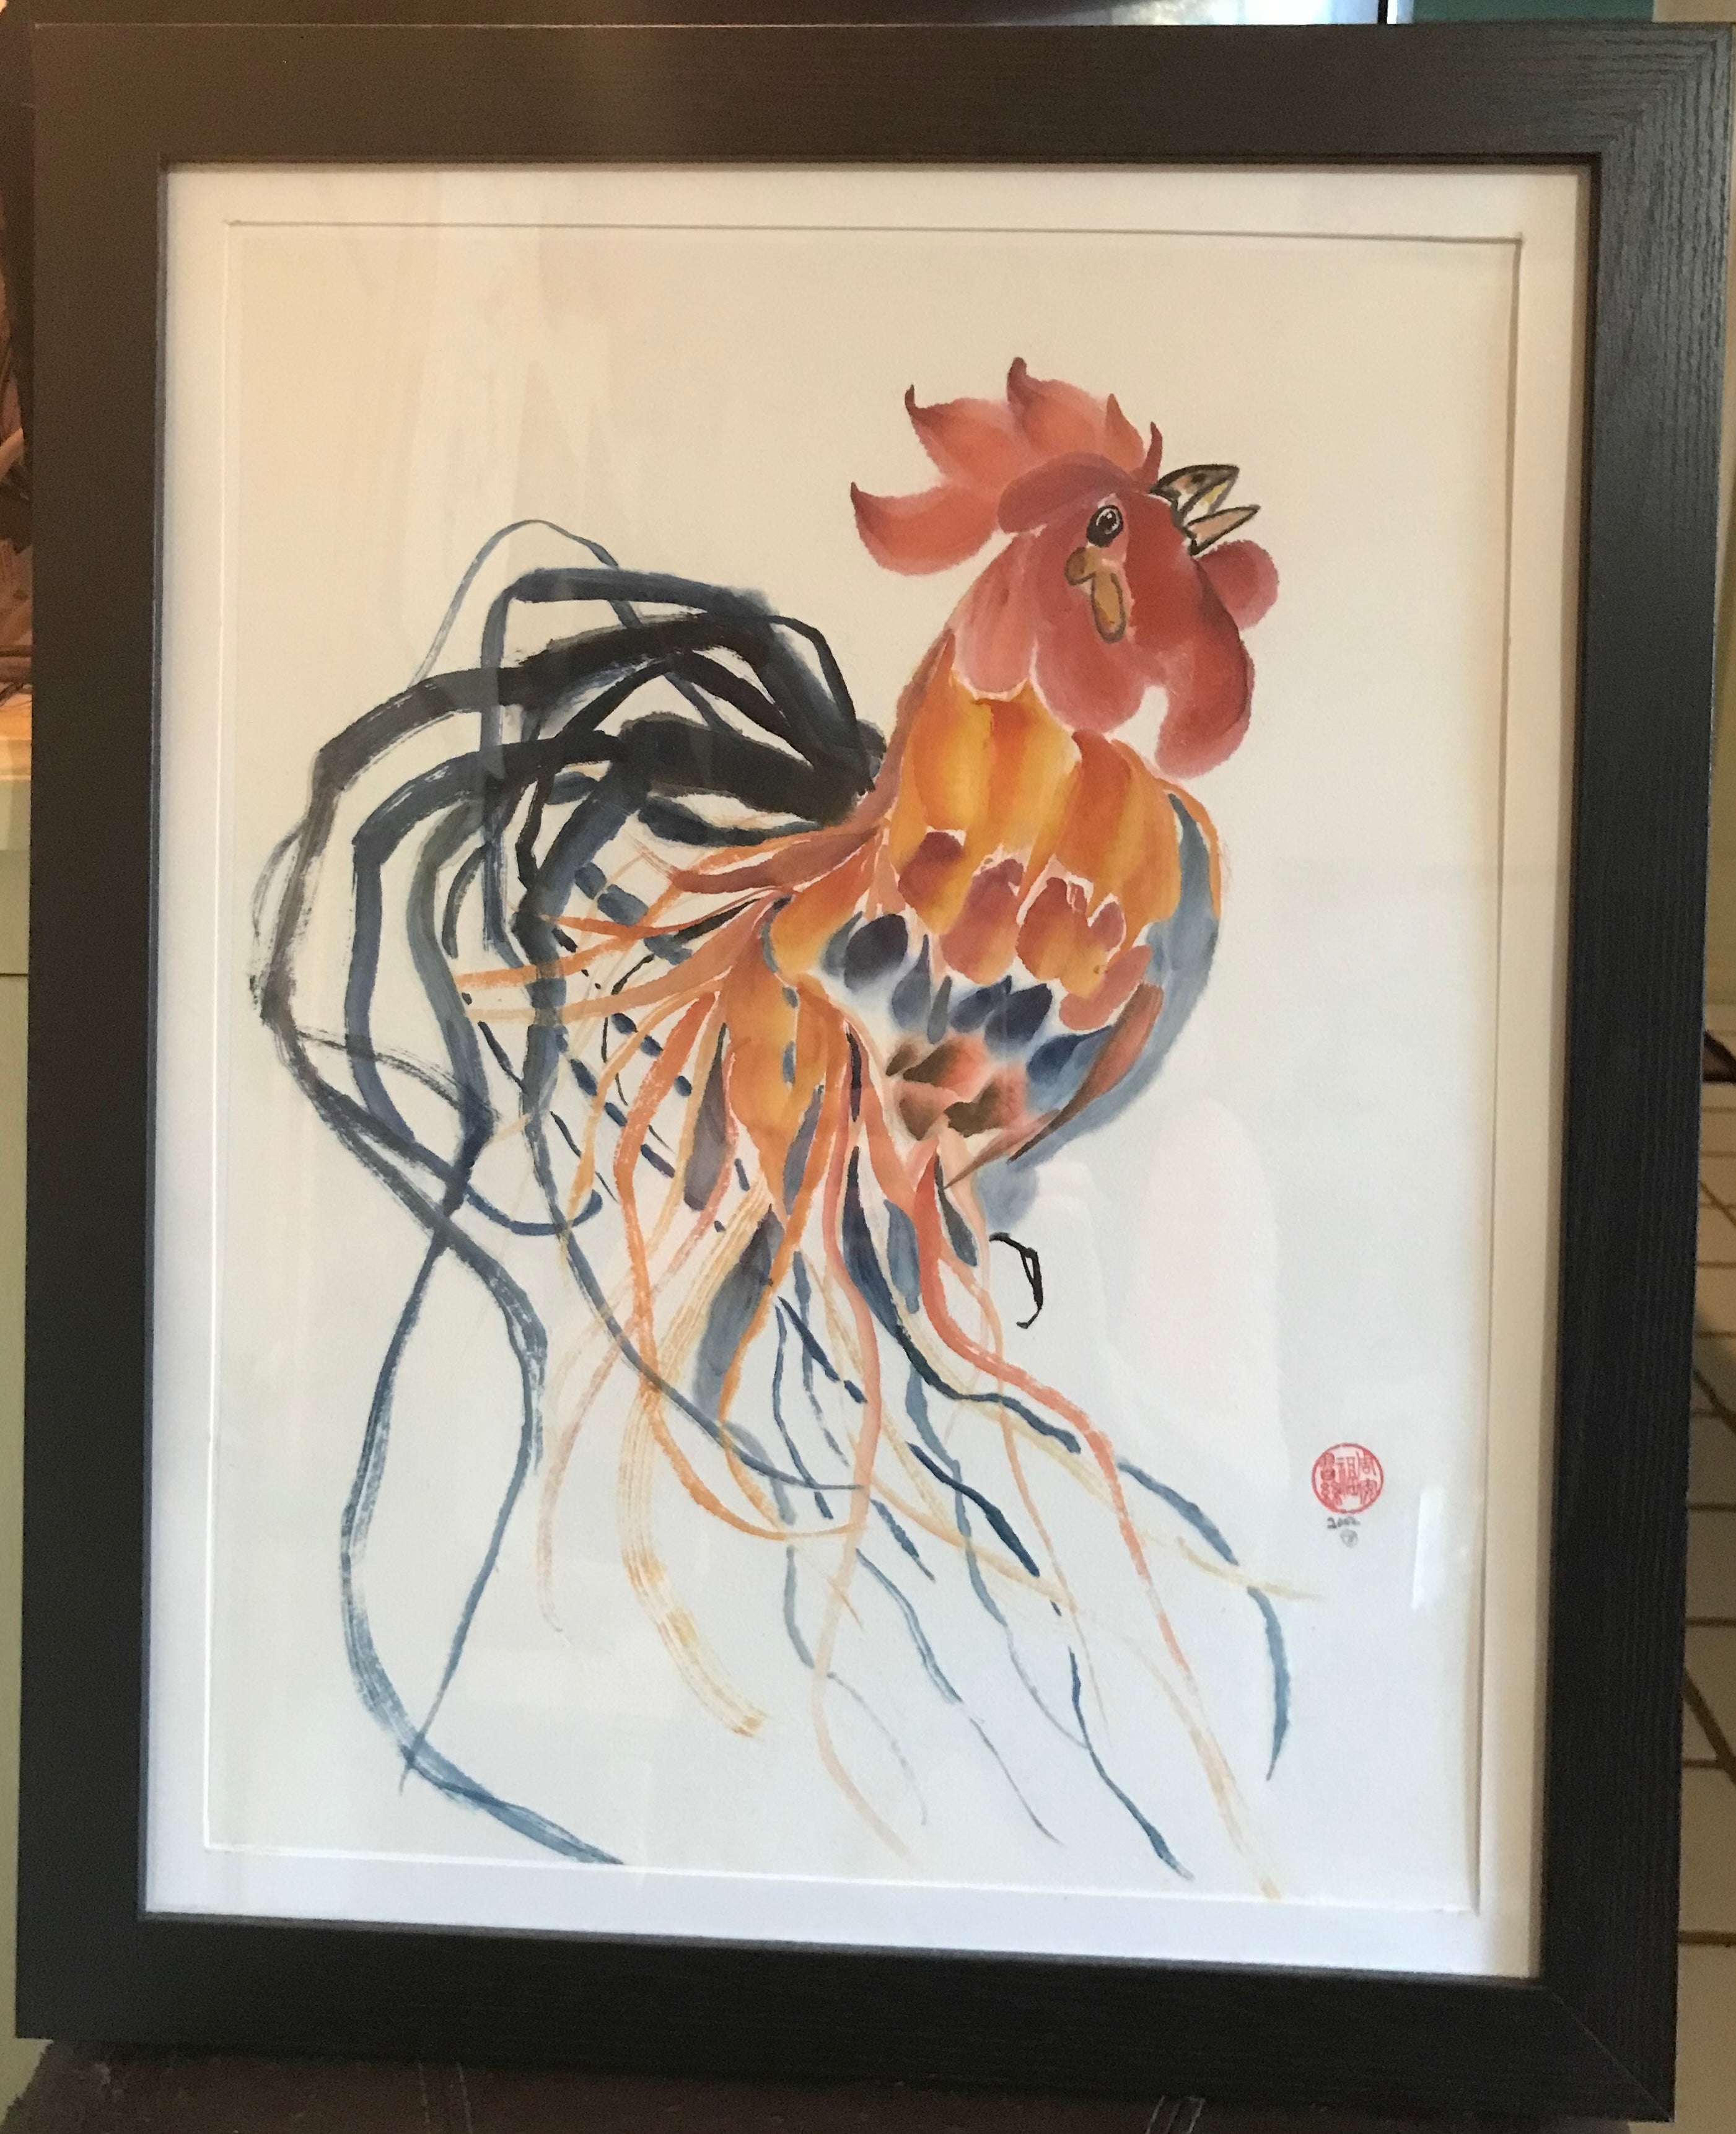 Rooster Chinese Brush Painting "Get Up I Say!"